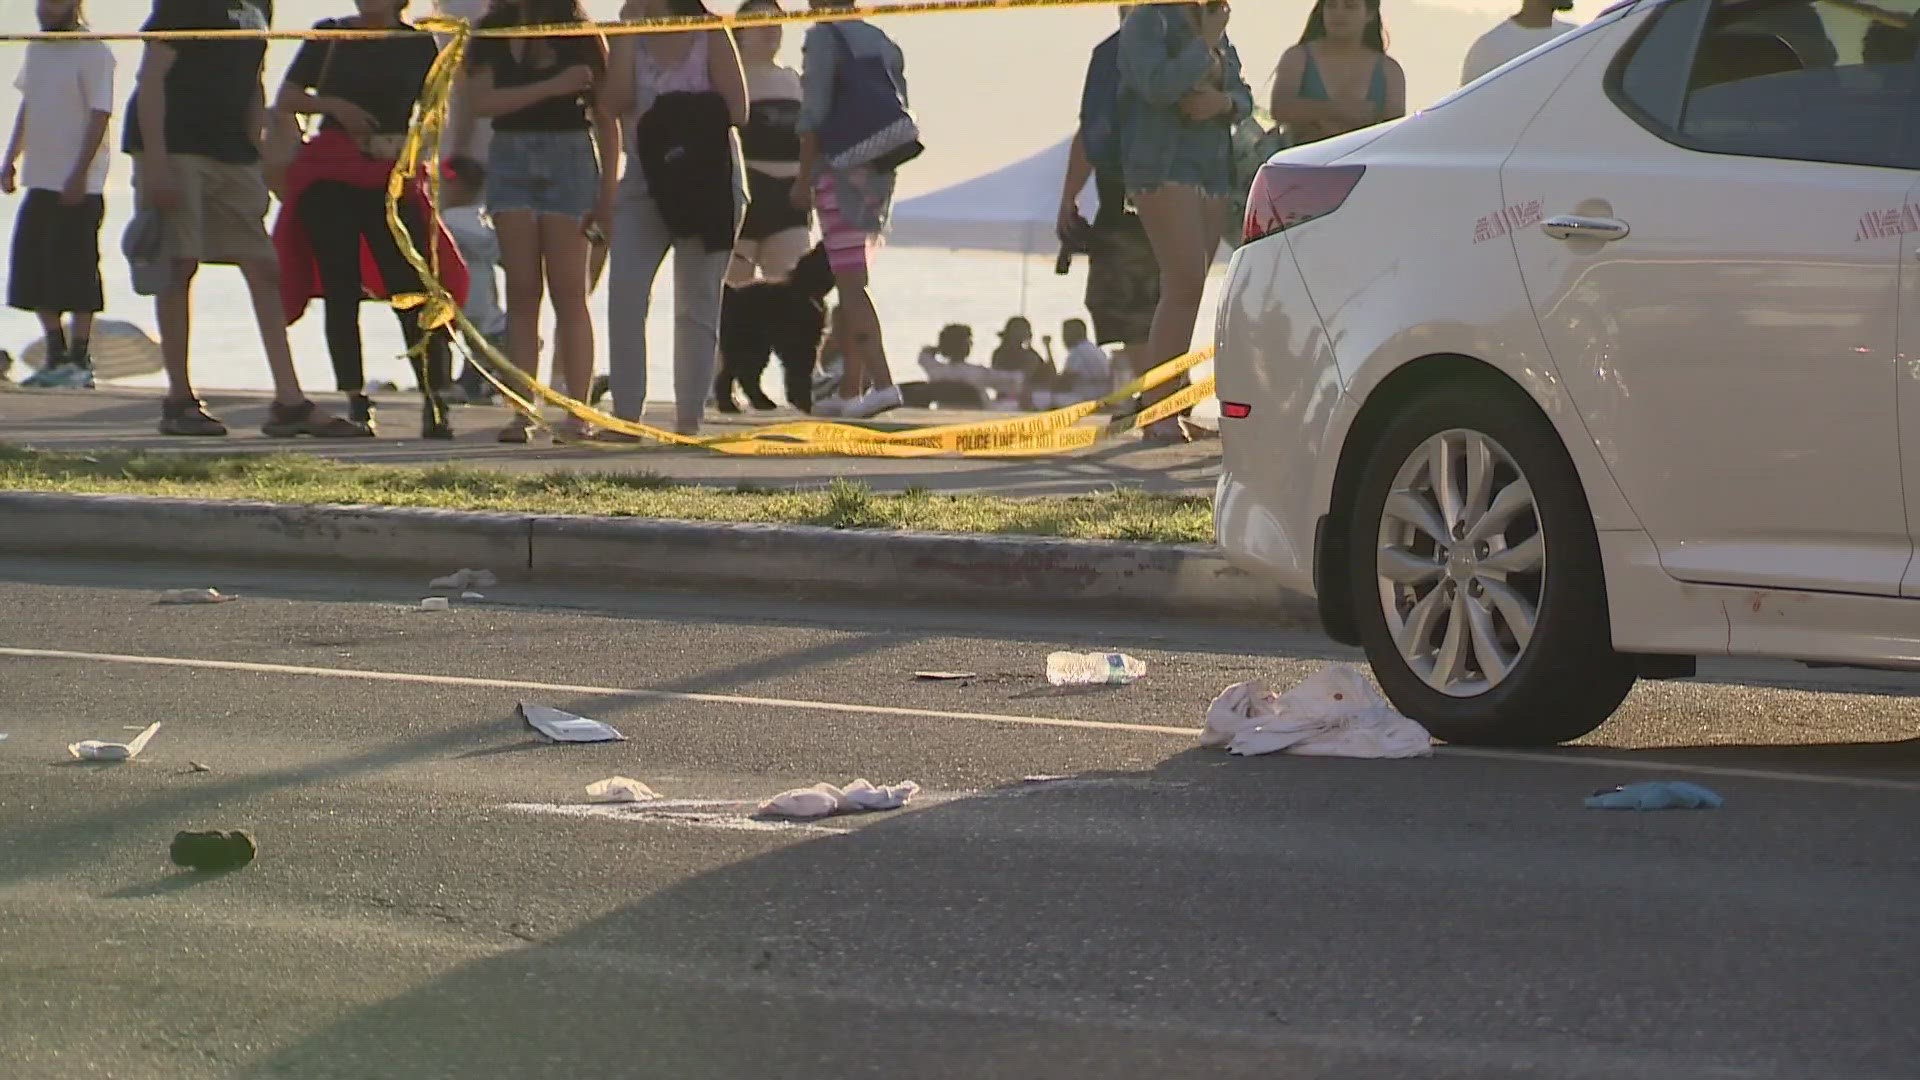 Beach-goers returned to Alki on Sunday in honor of Mother's Day, but many were unnerved by news of the shooting.